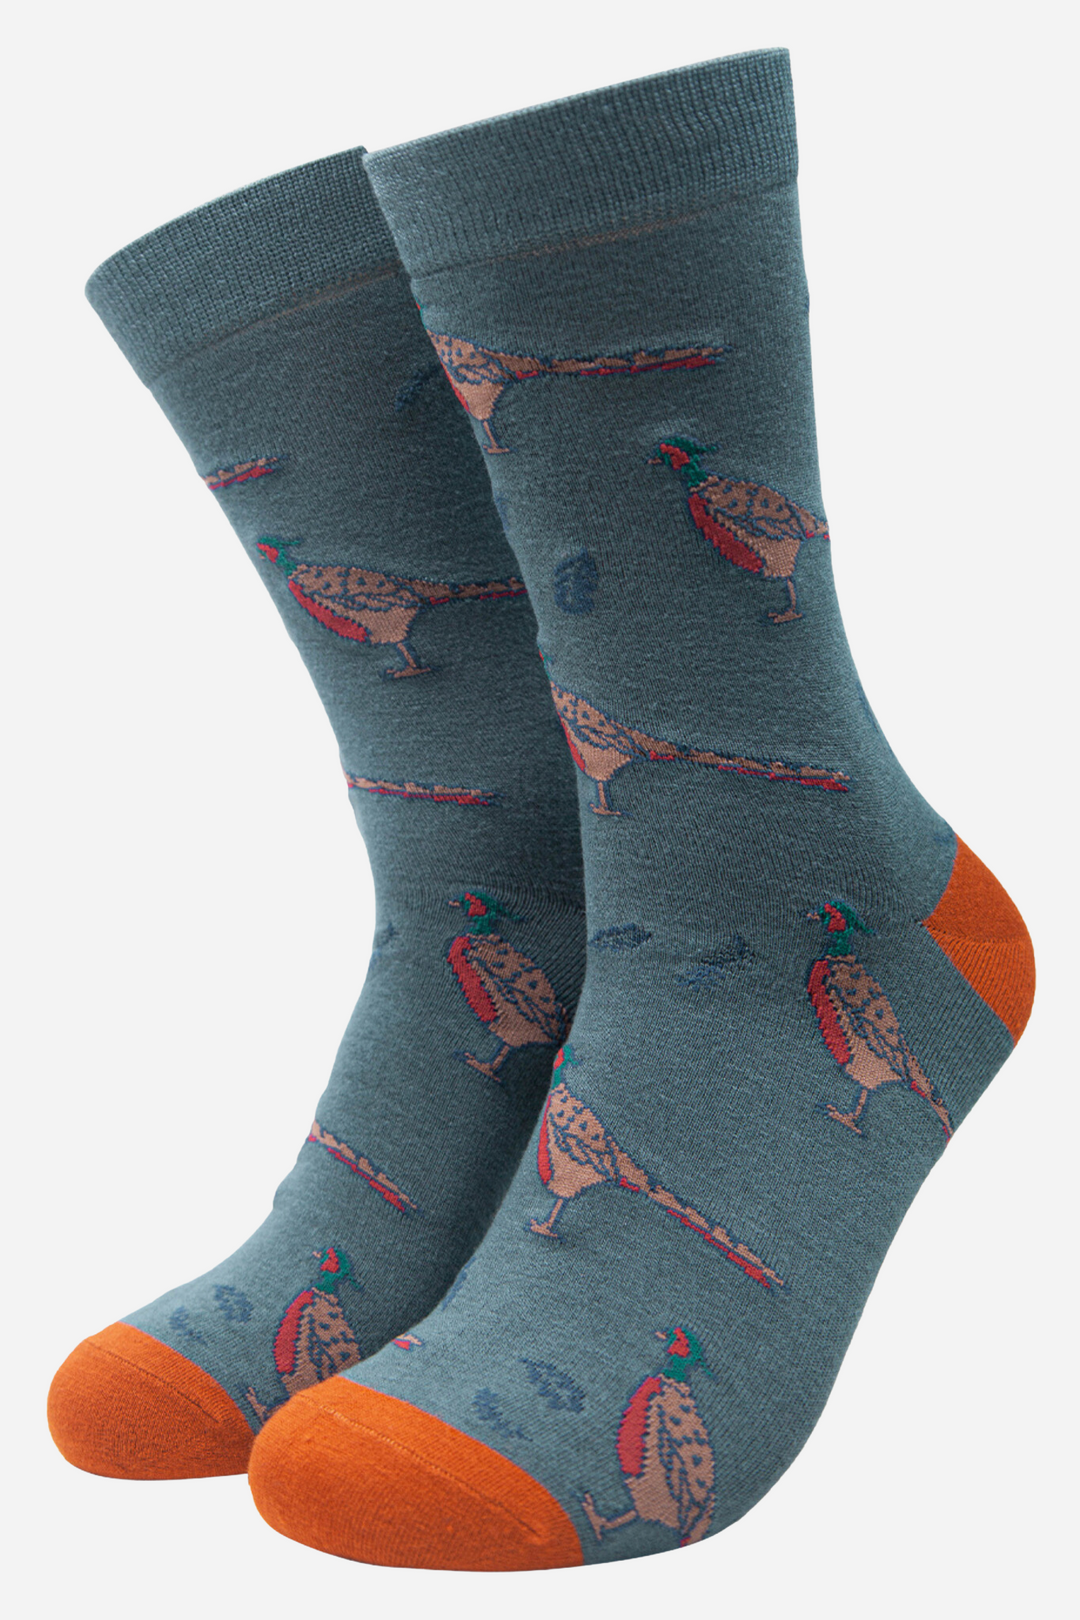 teal blue socks with woodland pheasants and  leaves